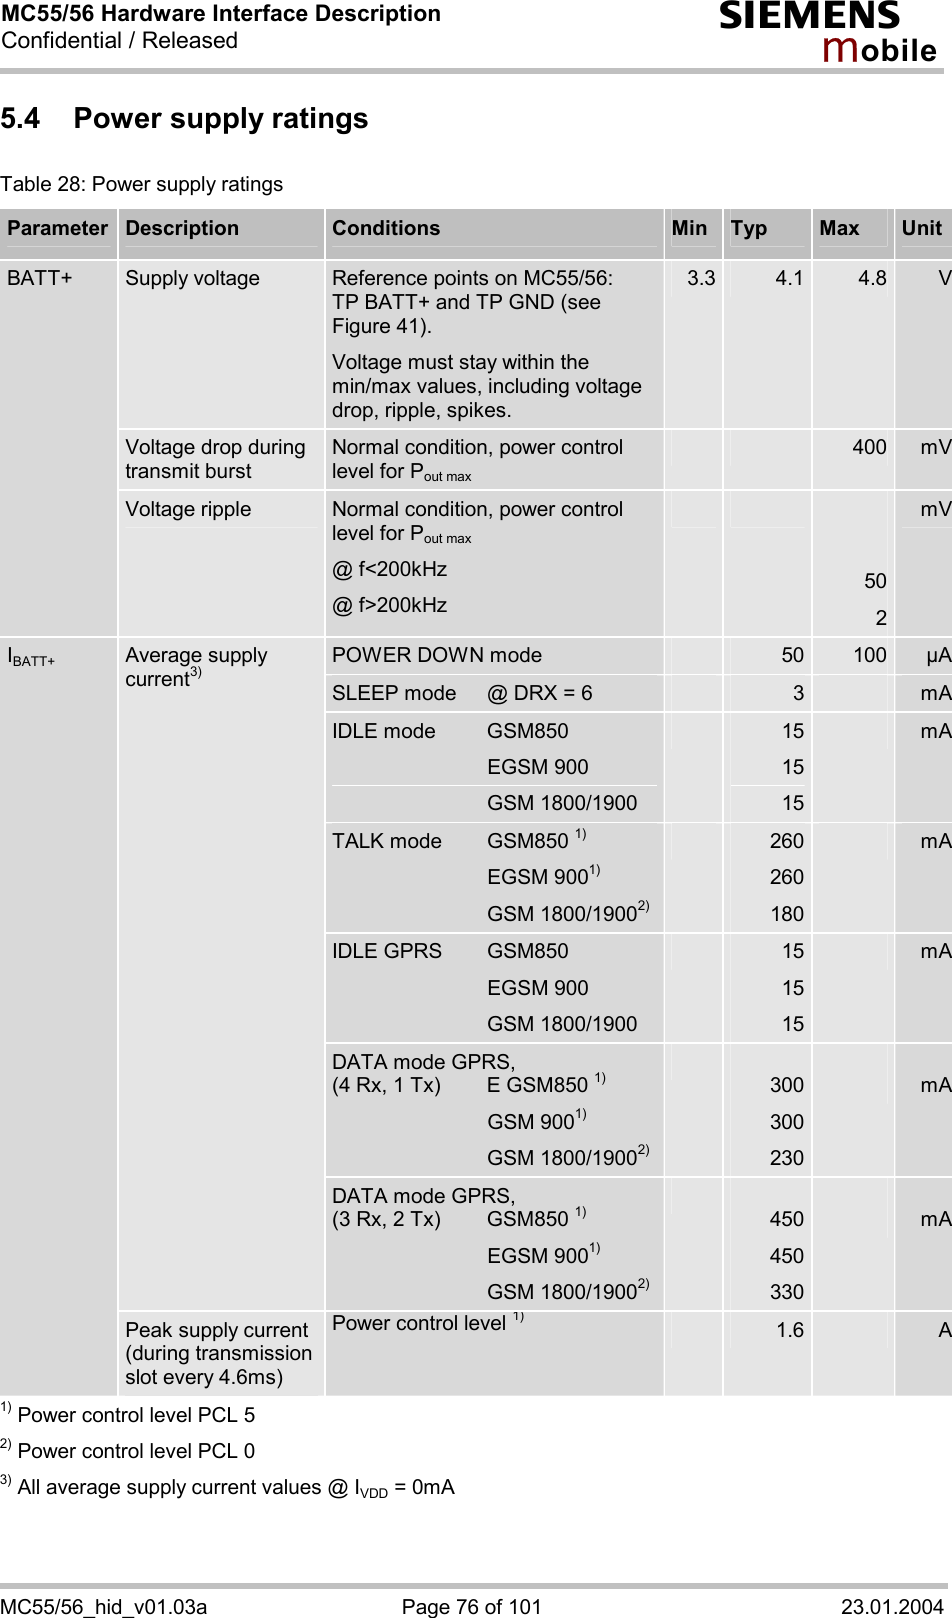 MC55/56 Hardware Interface Description Confidential / Released s mo b i l e MC55/56_hid_v01.03a  Page 76 of 101  23.01.2004 5.4  Power supply ratings Table 28: Power supply ratings Parameter  Description  Conditions  Min  Typ  Max  Unit Supply voltage  Reference points on MC55/56:  TP BATT+ and TP GND (see Figure 41). Voltage must stay within the min/max values, including voltage drop, ripple, spikes. 3.3 4.1  4.8 VVoltage drop during transmit burst Normal condition, power control level for Pout max  400 mVBATT+  Voltage ripple  Normal condition, power control level for Pout max @ f&lt;200kHz @ f&gt;200kHz  502mVPOWER DOWN mode  50  100 µASLEEP mode  @ DRX = 6  3  mAIDLE mode   GSM850                             EGSM 900  GSM 1800/1900 15 15 15 mATALK mode   GSM850 1)                            EGSM 9001)   GSM 1800/19002) 260  260 180 mAIDLE GPRS  GSM850                            EGSM 900  GSM 1800/1900 15 15 15 mADATA mode GPRS, (4 Rx, 1 Tx)  E GSM850 1)                            GSM 9001)  GSM 1800/19002)  300 300 230 mAAverage supply current3) DATA mode GPRS, (3 Rx, 2 Tx)  GSM850 1)                            EGSM 9001)  GSM 1800/19002)  450 450 330 mAIBATT+ Peak supply current (during transmission slot every 4.6ms) Power control level 1) 1.6  A1) Power control level PCL 5 2) Power control level PCL 0 3) All average supply current values @ IVDD = 0mA  